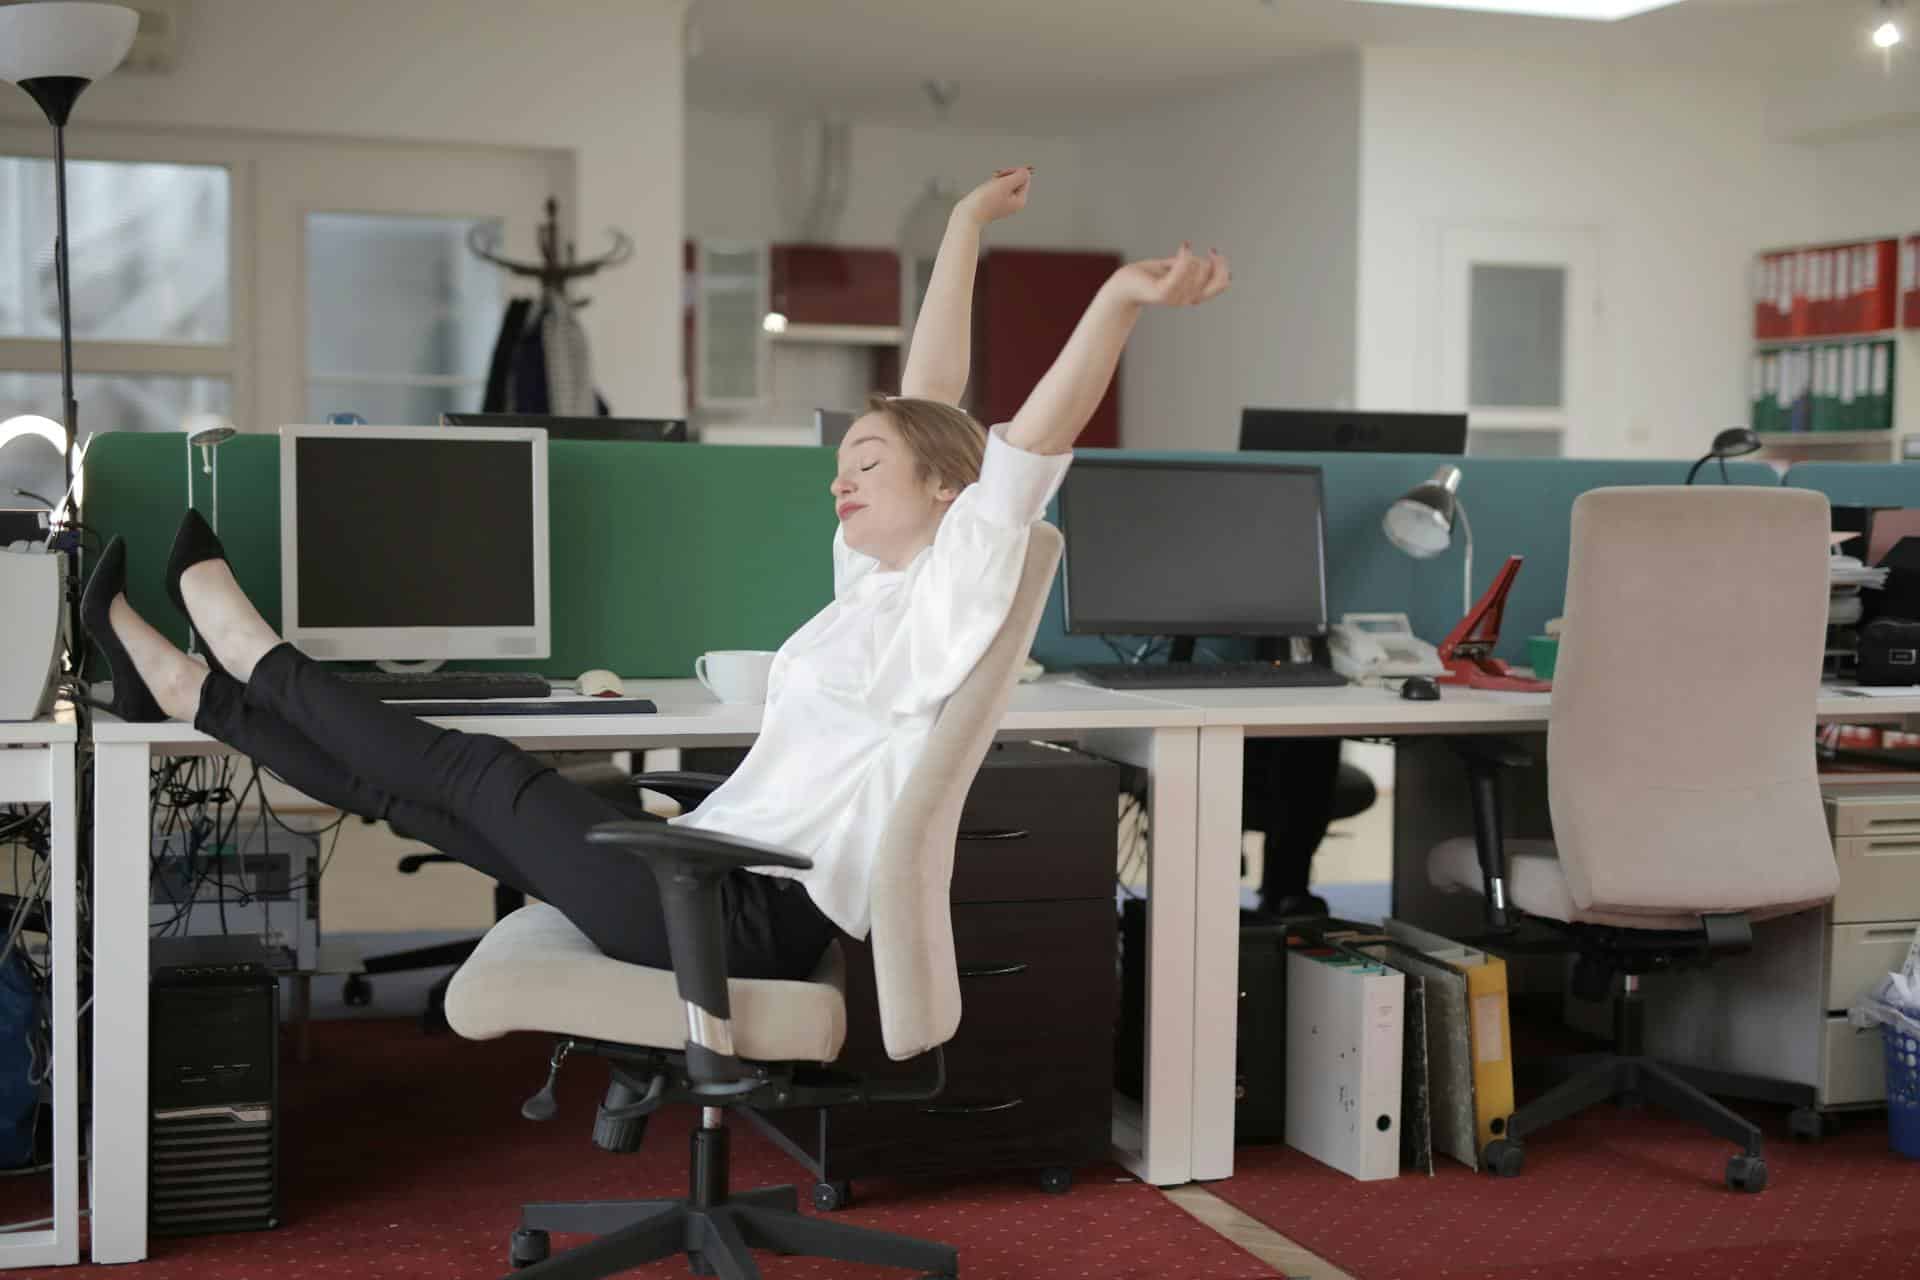 Woman stretches arms widely while sitting at an office desk with feet kicked up on desk.